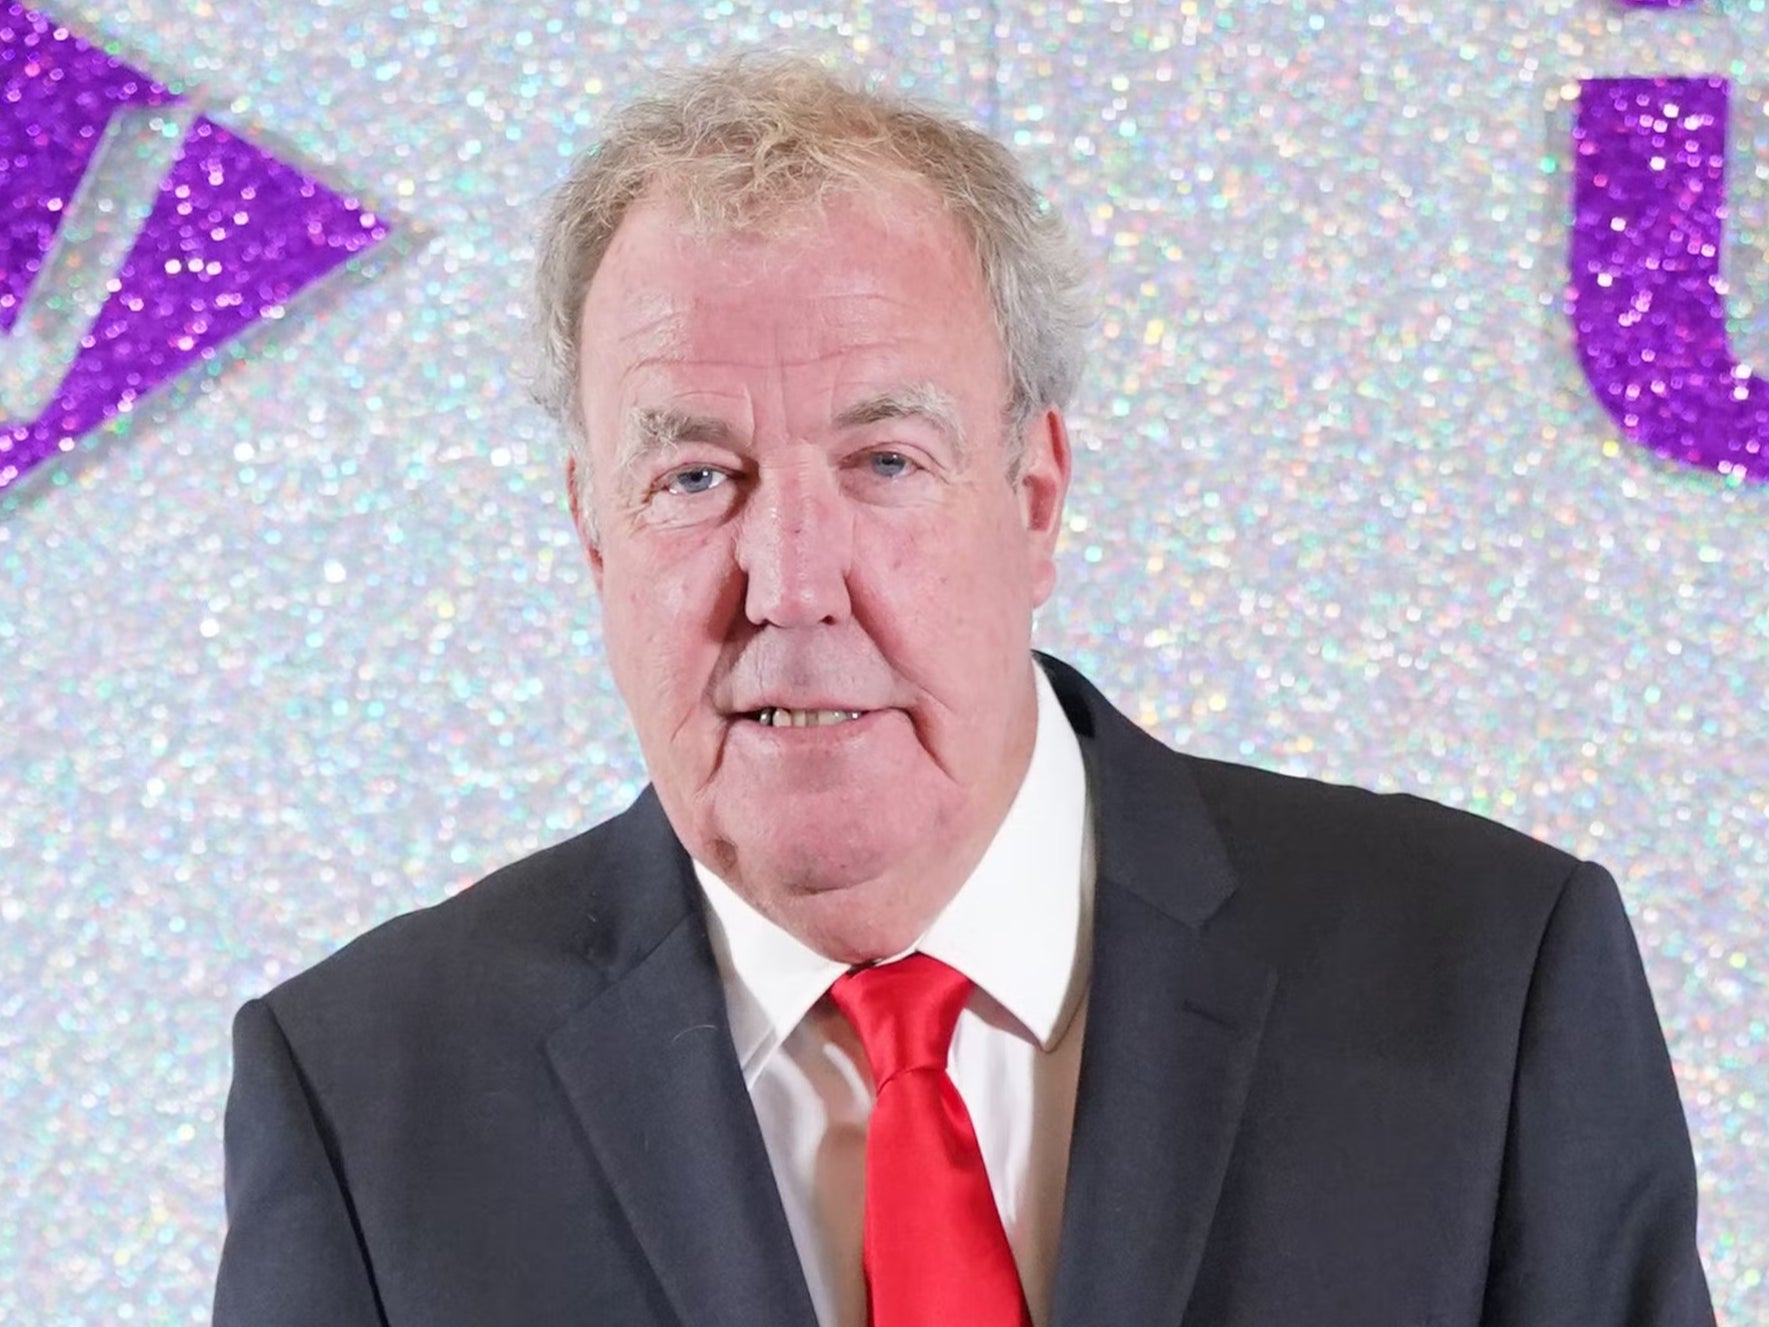 Clarkson says he wrote to the royals on Christmas day to apologise